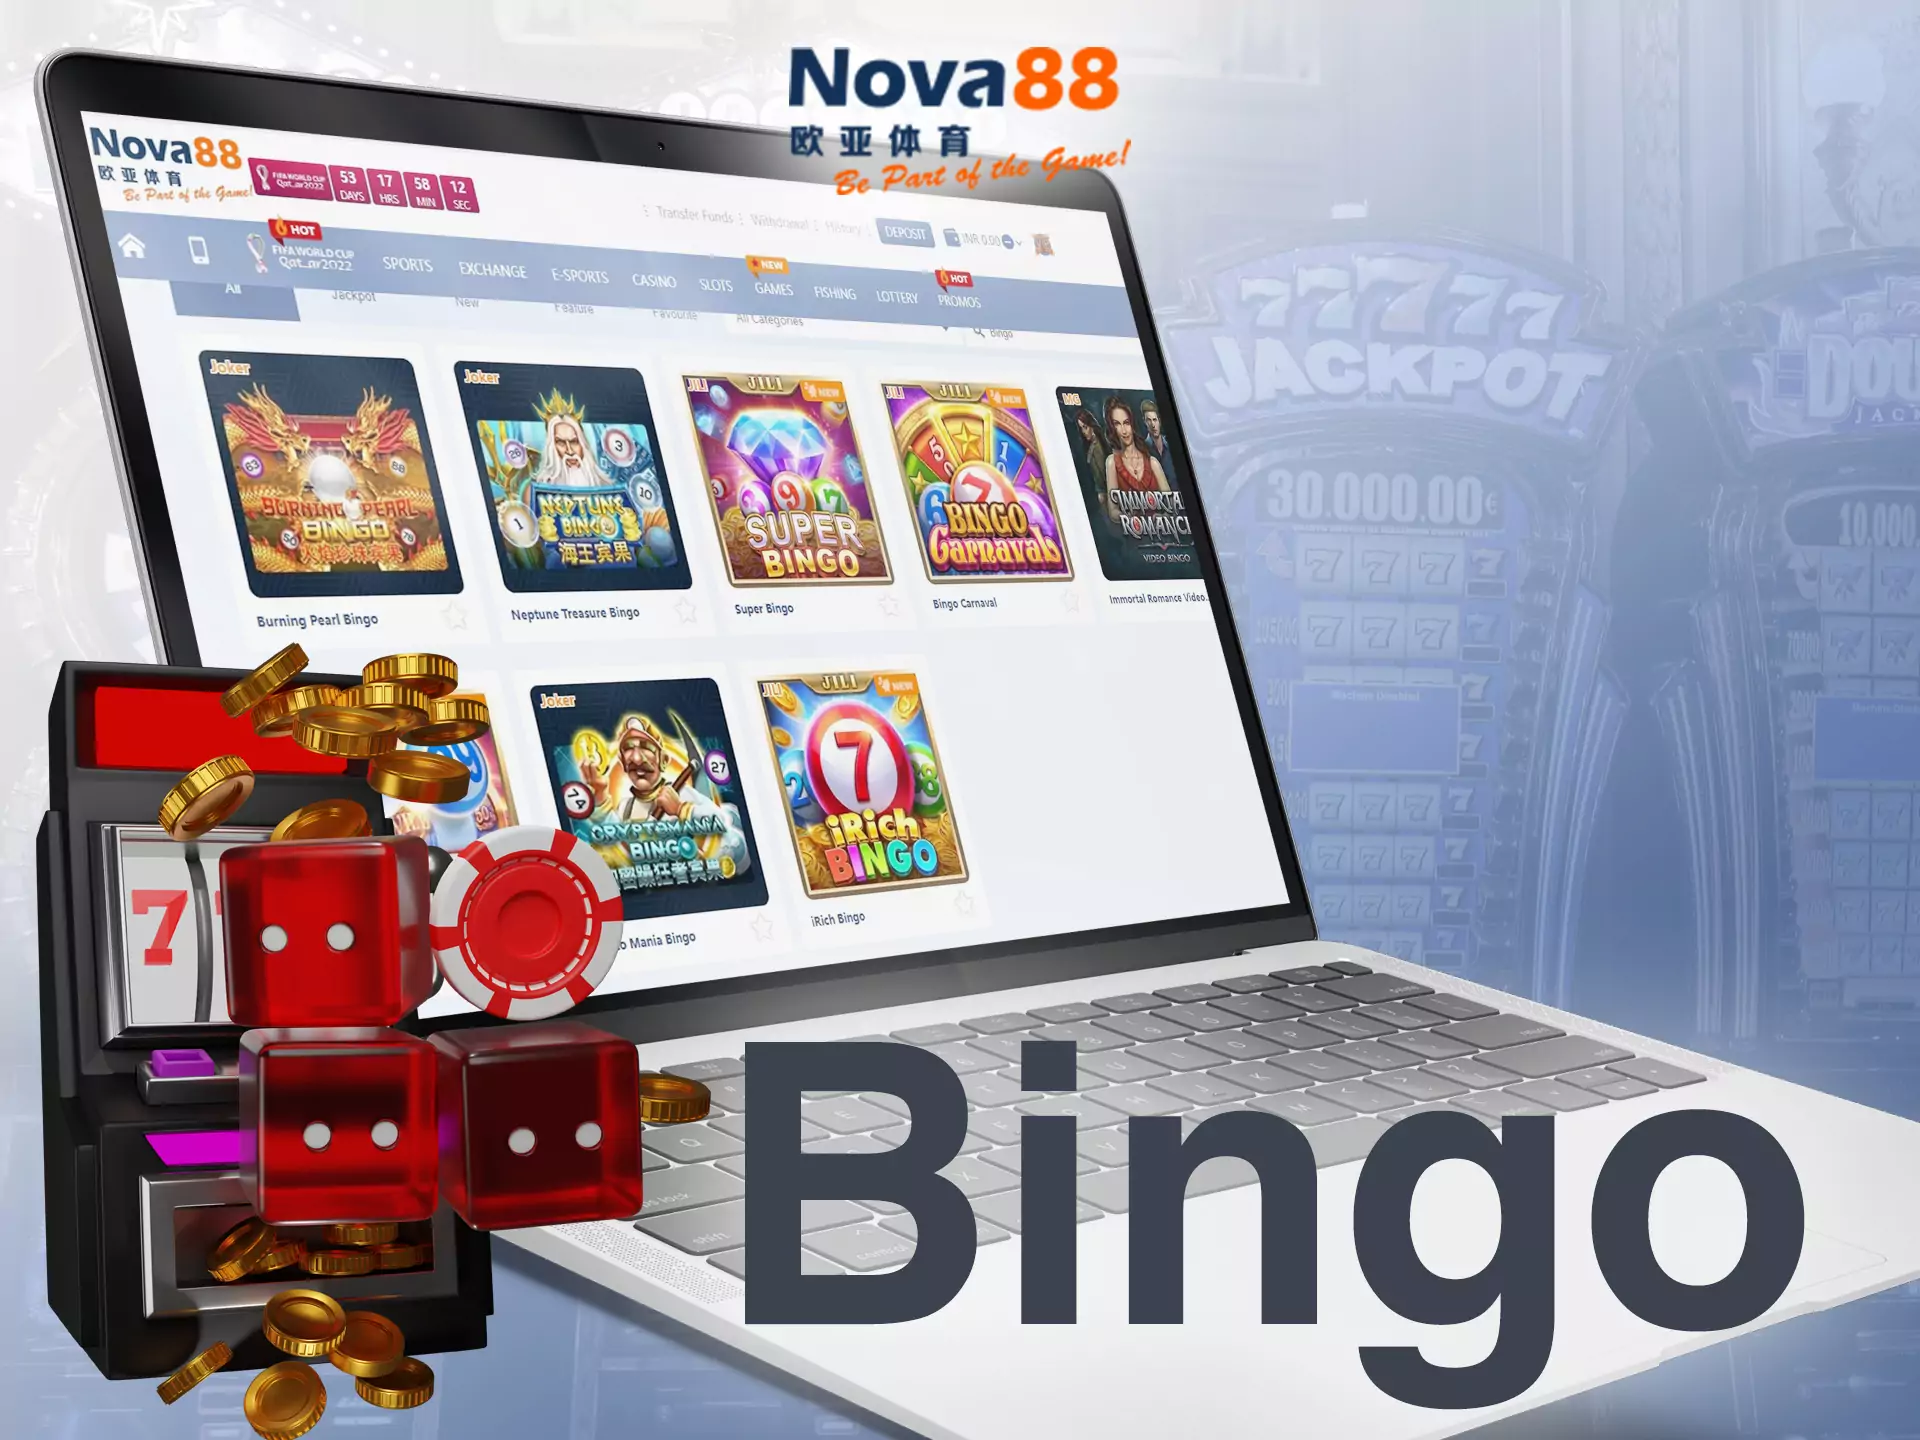 Besides betting and casino, you can play bingo games on Nova88.